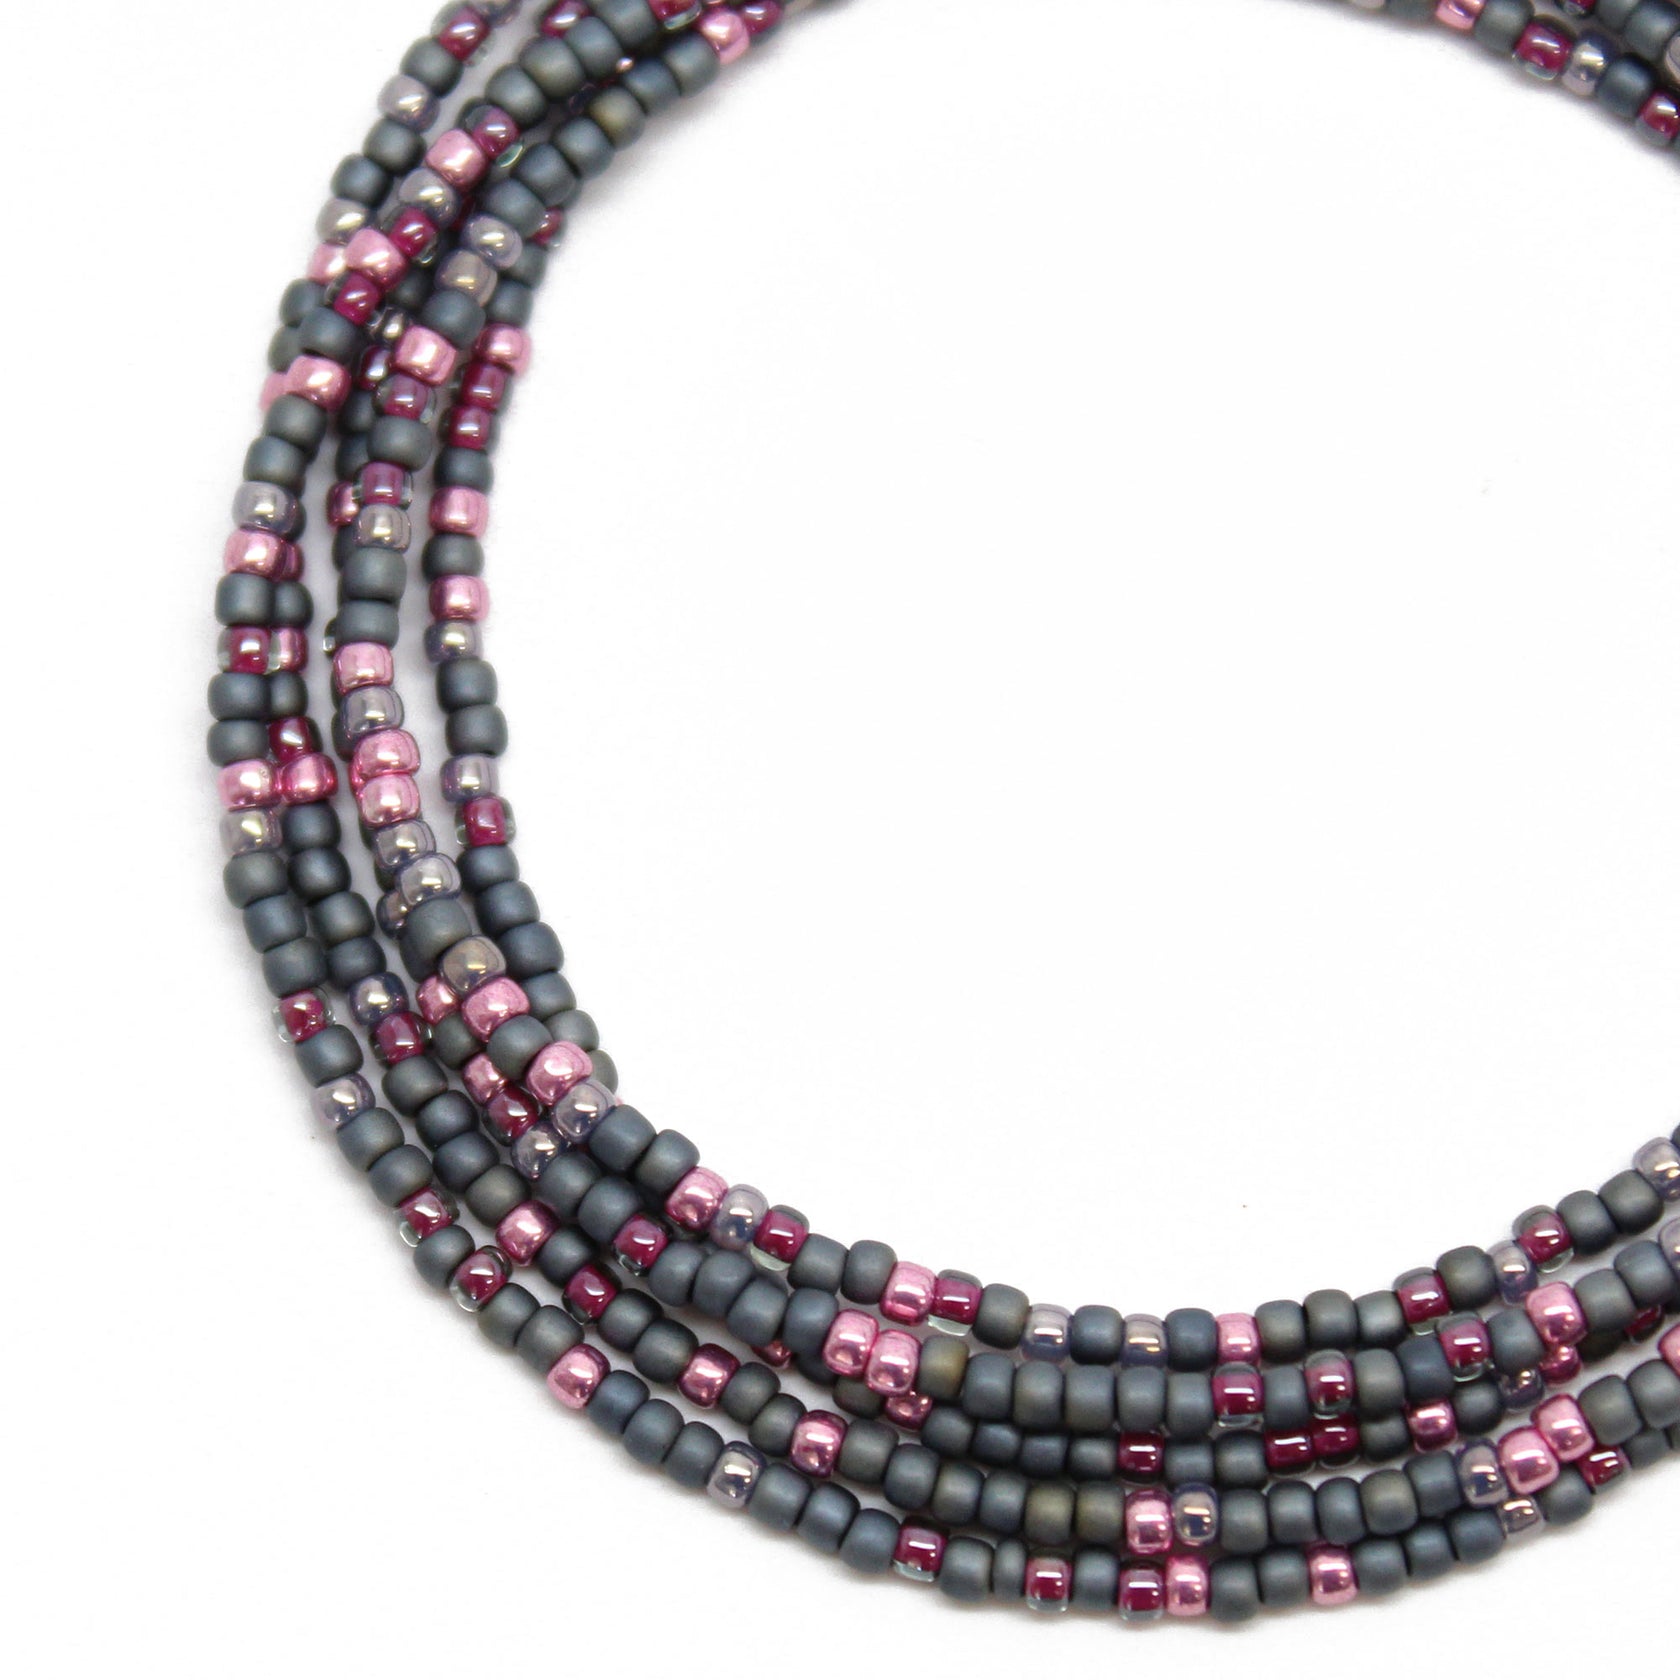 Grey and Pink Seed Bead Necklace, Thin 1.5mm Single Strand – Kathy Bankston